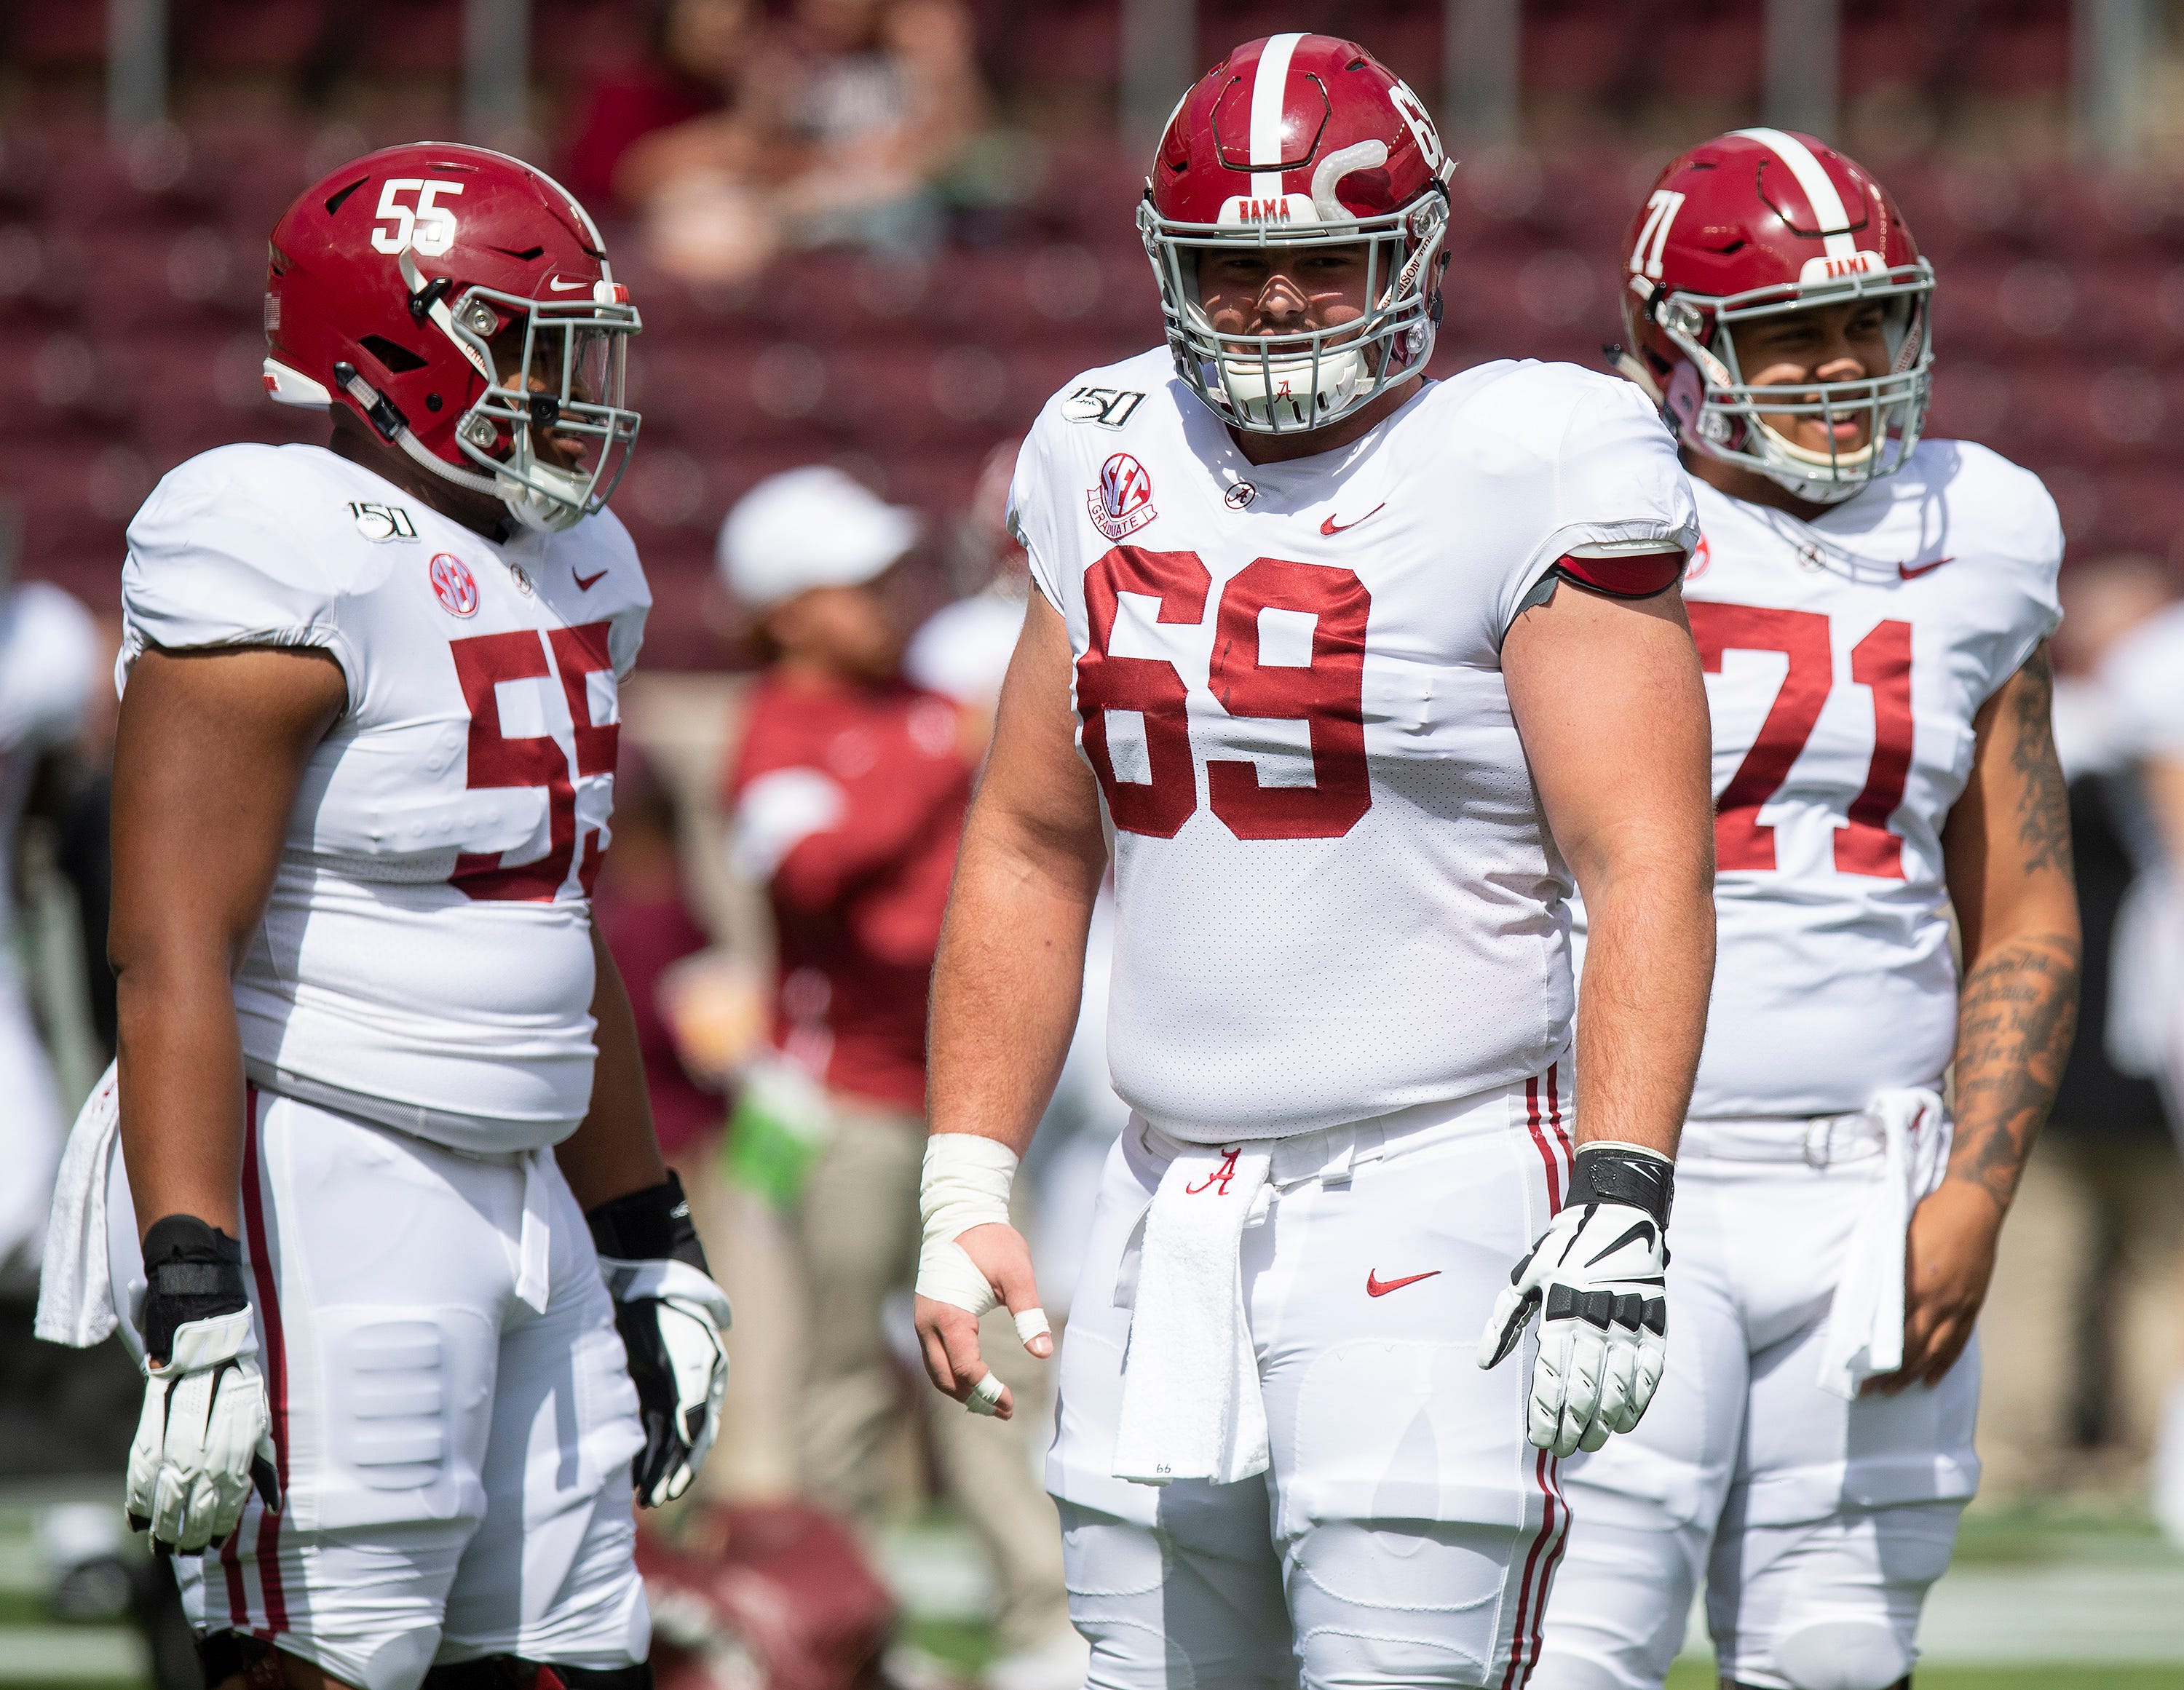 Alabama offensive linemen Emil Ekiyor, Jr., (55), Landon Dickerson (69) and Darrian Dalcourt (71) before the Texas A&M game at Kyle Field in College Station, Texas on Saturday October 12, 2019.